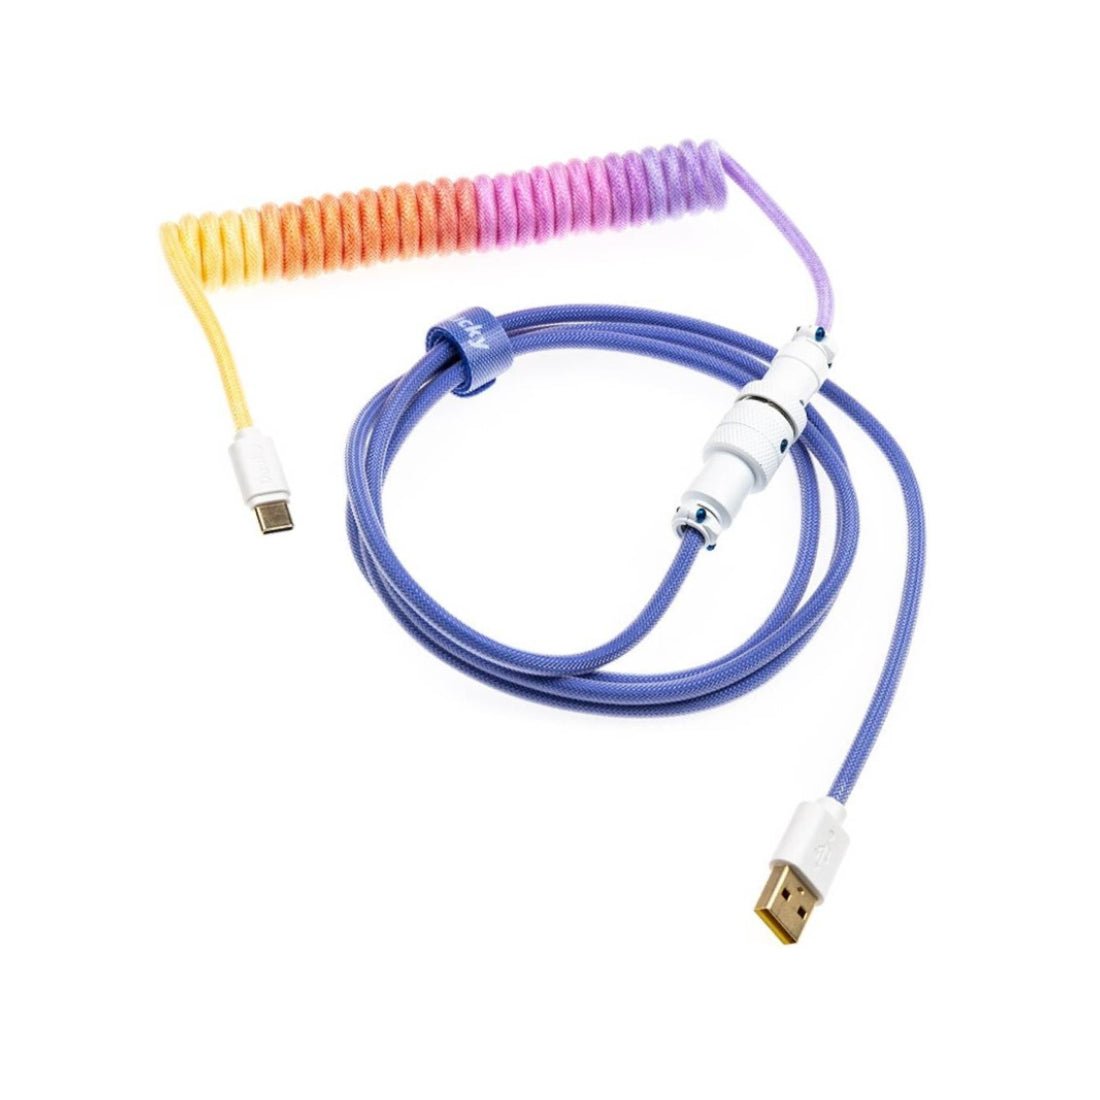 Ducky Gradient Premicord Custom Keyboard Cable - Afterglow - كابل - Store 974 | ستور ٩٧٤